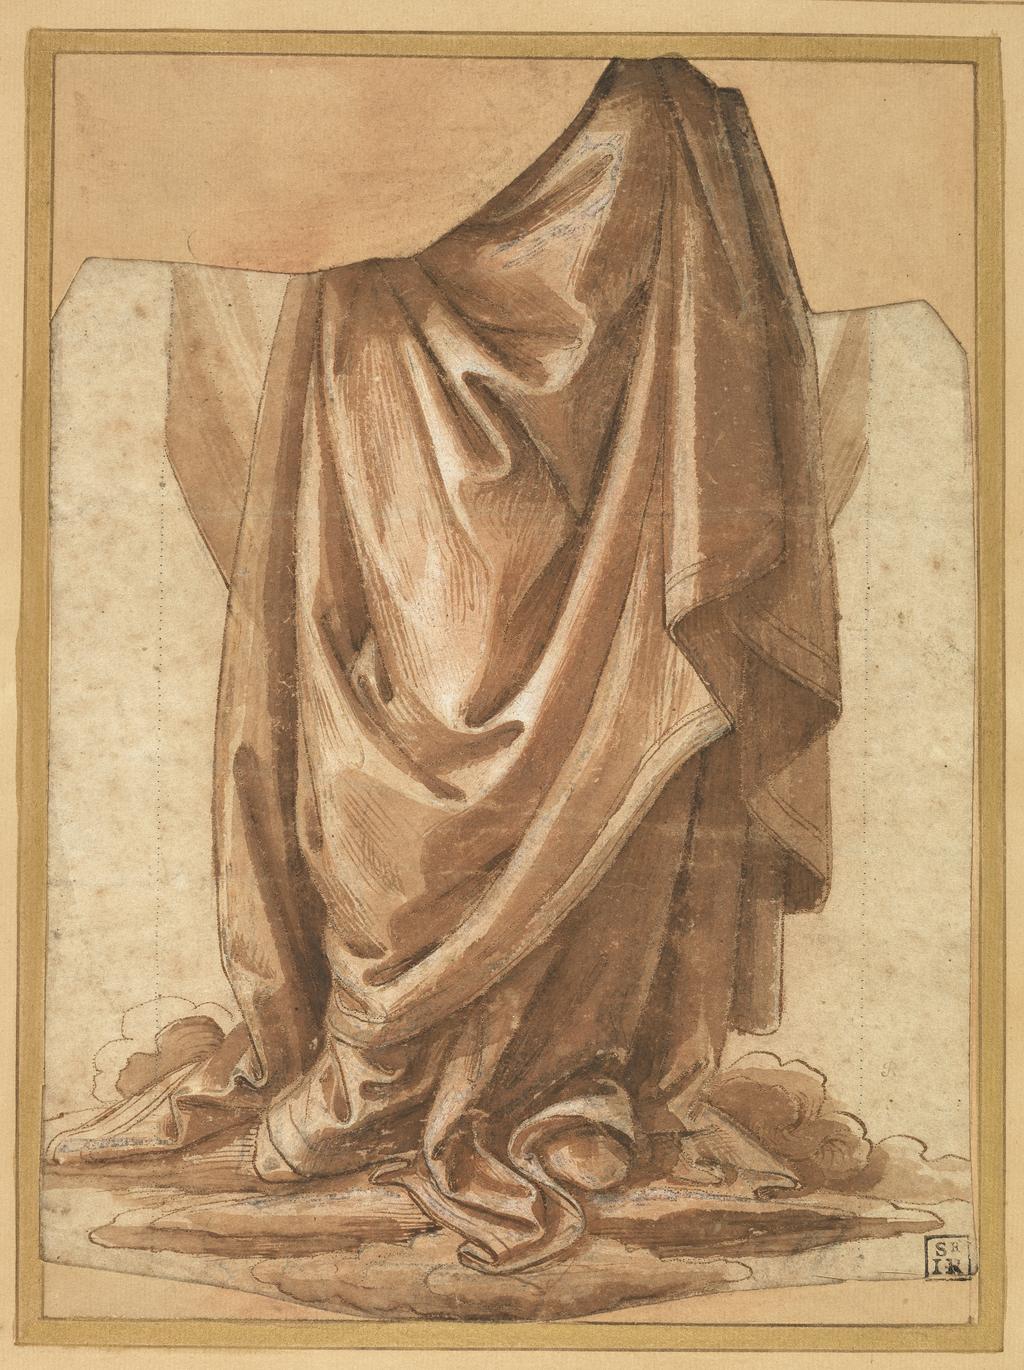 An image of Drapery study. Raffaellino del Garbo (Italian, 1466-1524). Black chalk, pen and brown ink, brown and pink wash, heightened with white (partly oxidized), indented with the stylus and pricked for transfer. Height 247 mm, width 177 mm. Florentine School.